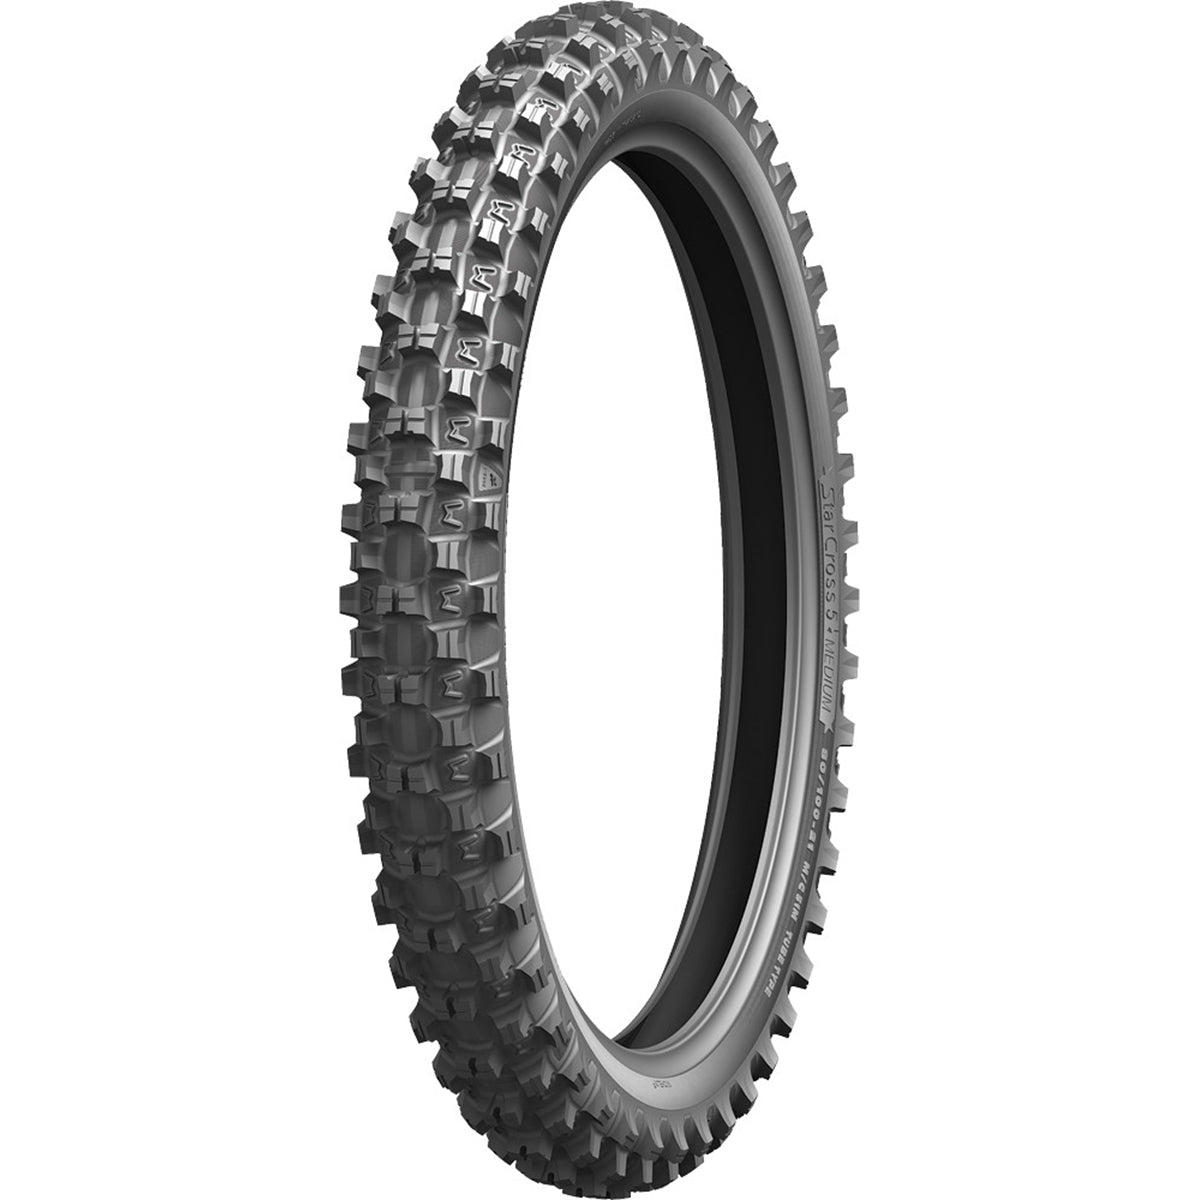 Michelin Starcross 5 21" Front Off-Road Tires-0312